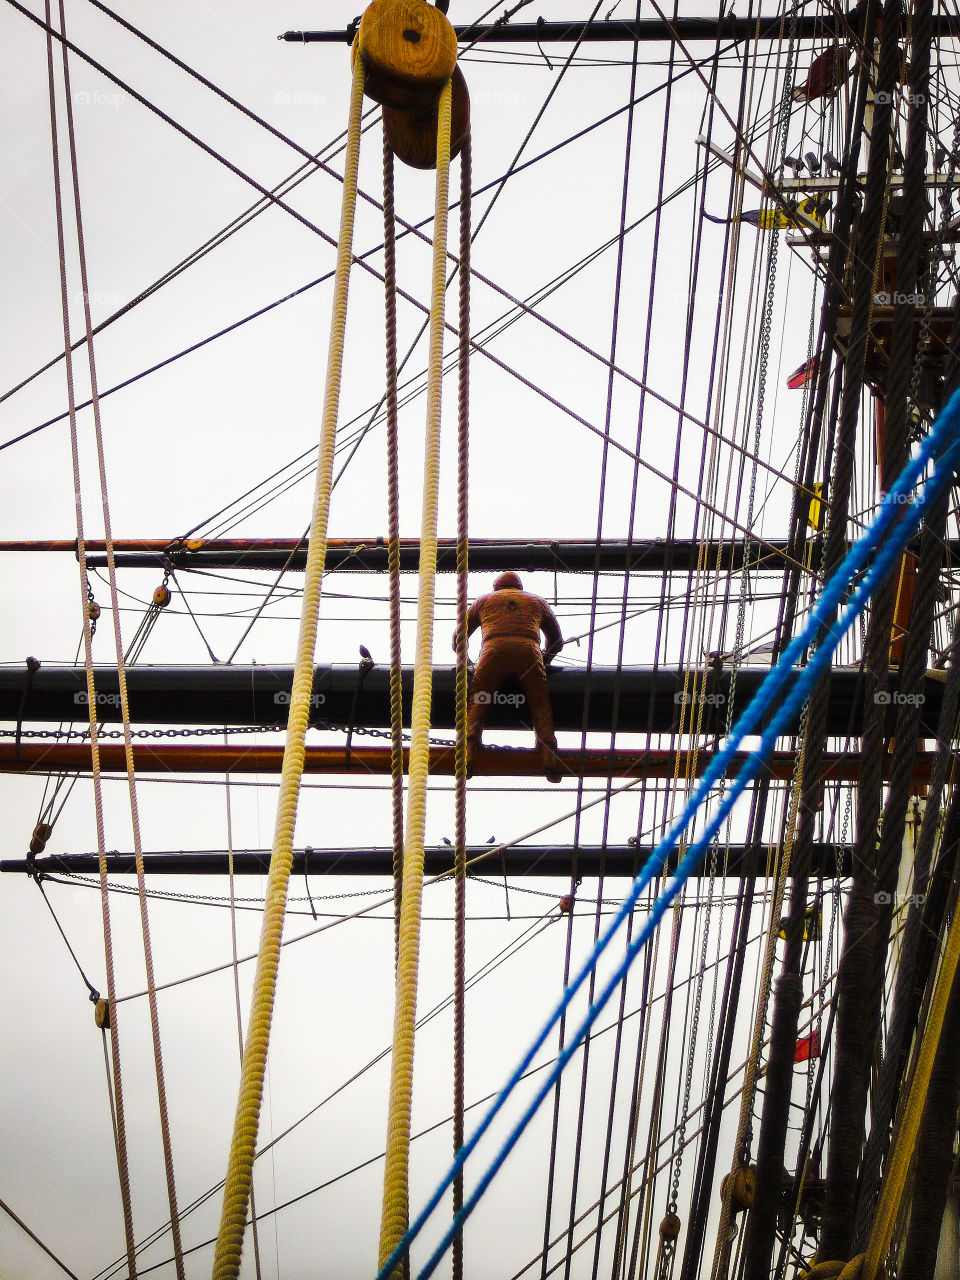 Sitting and rigging